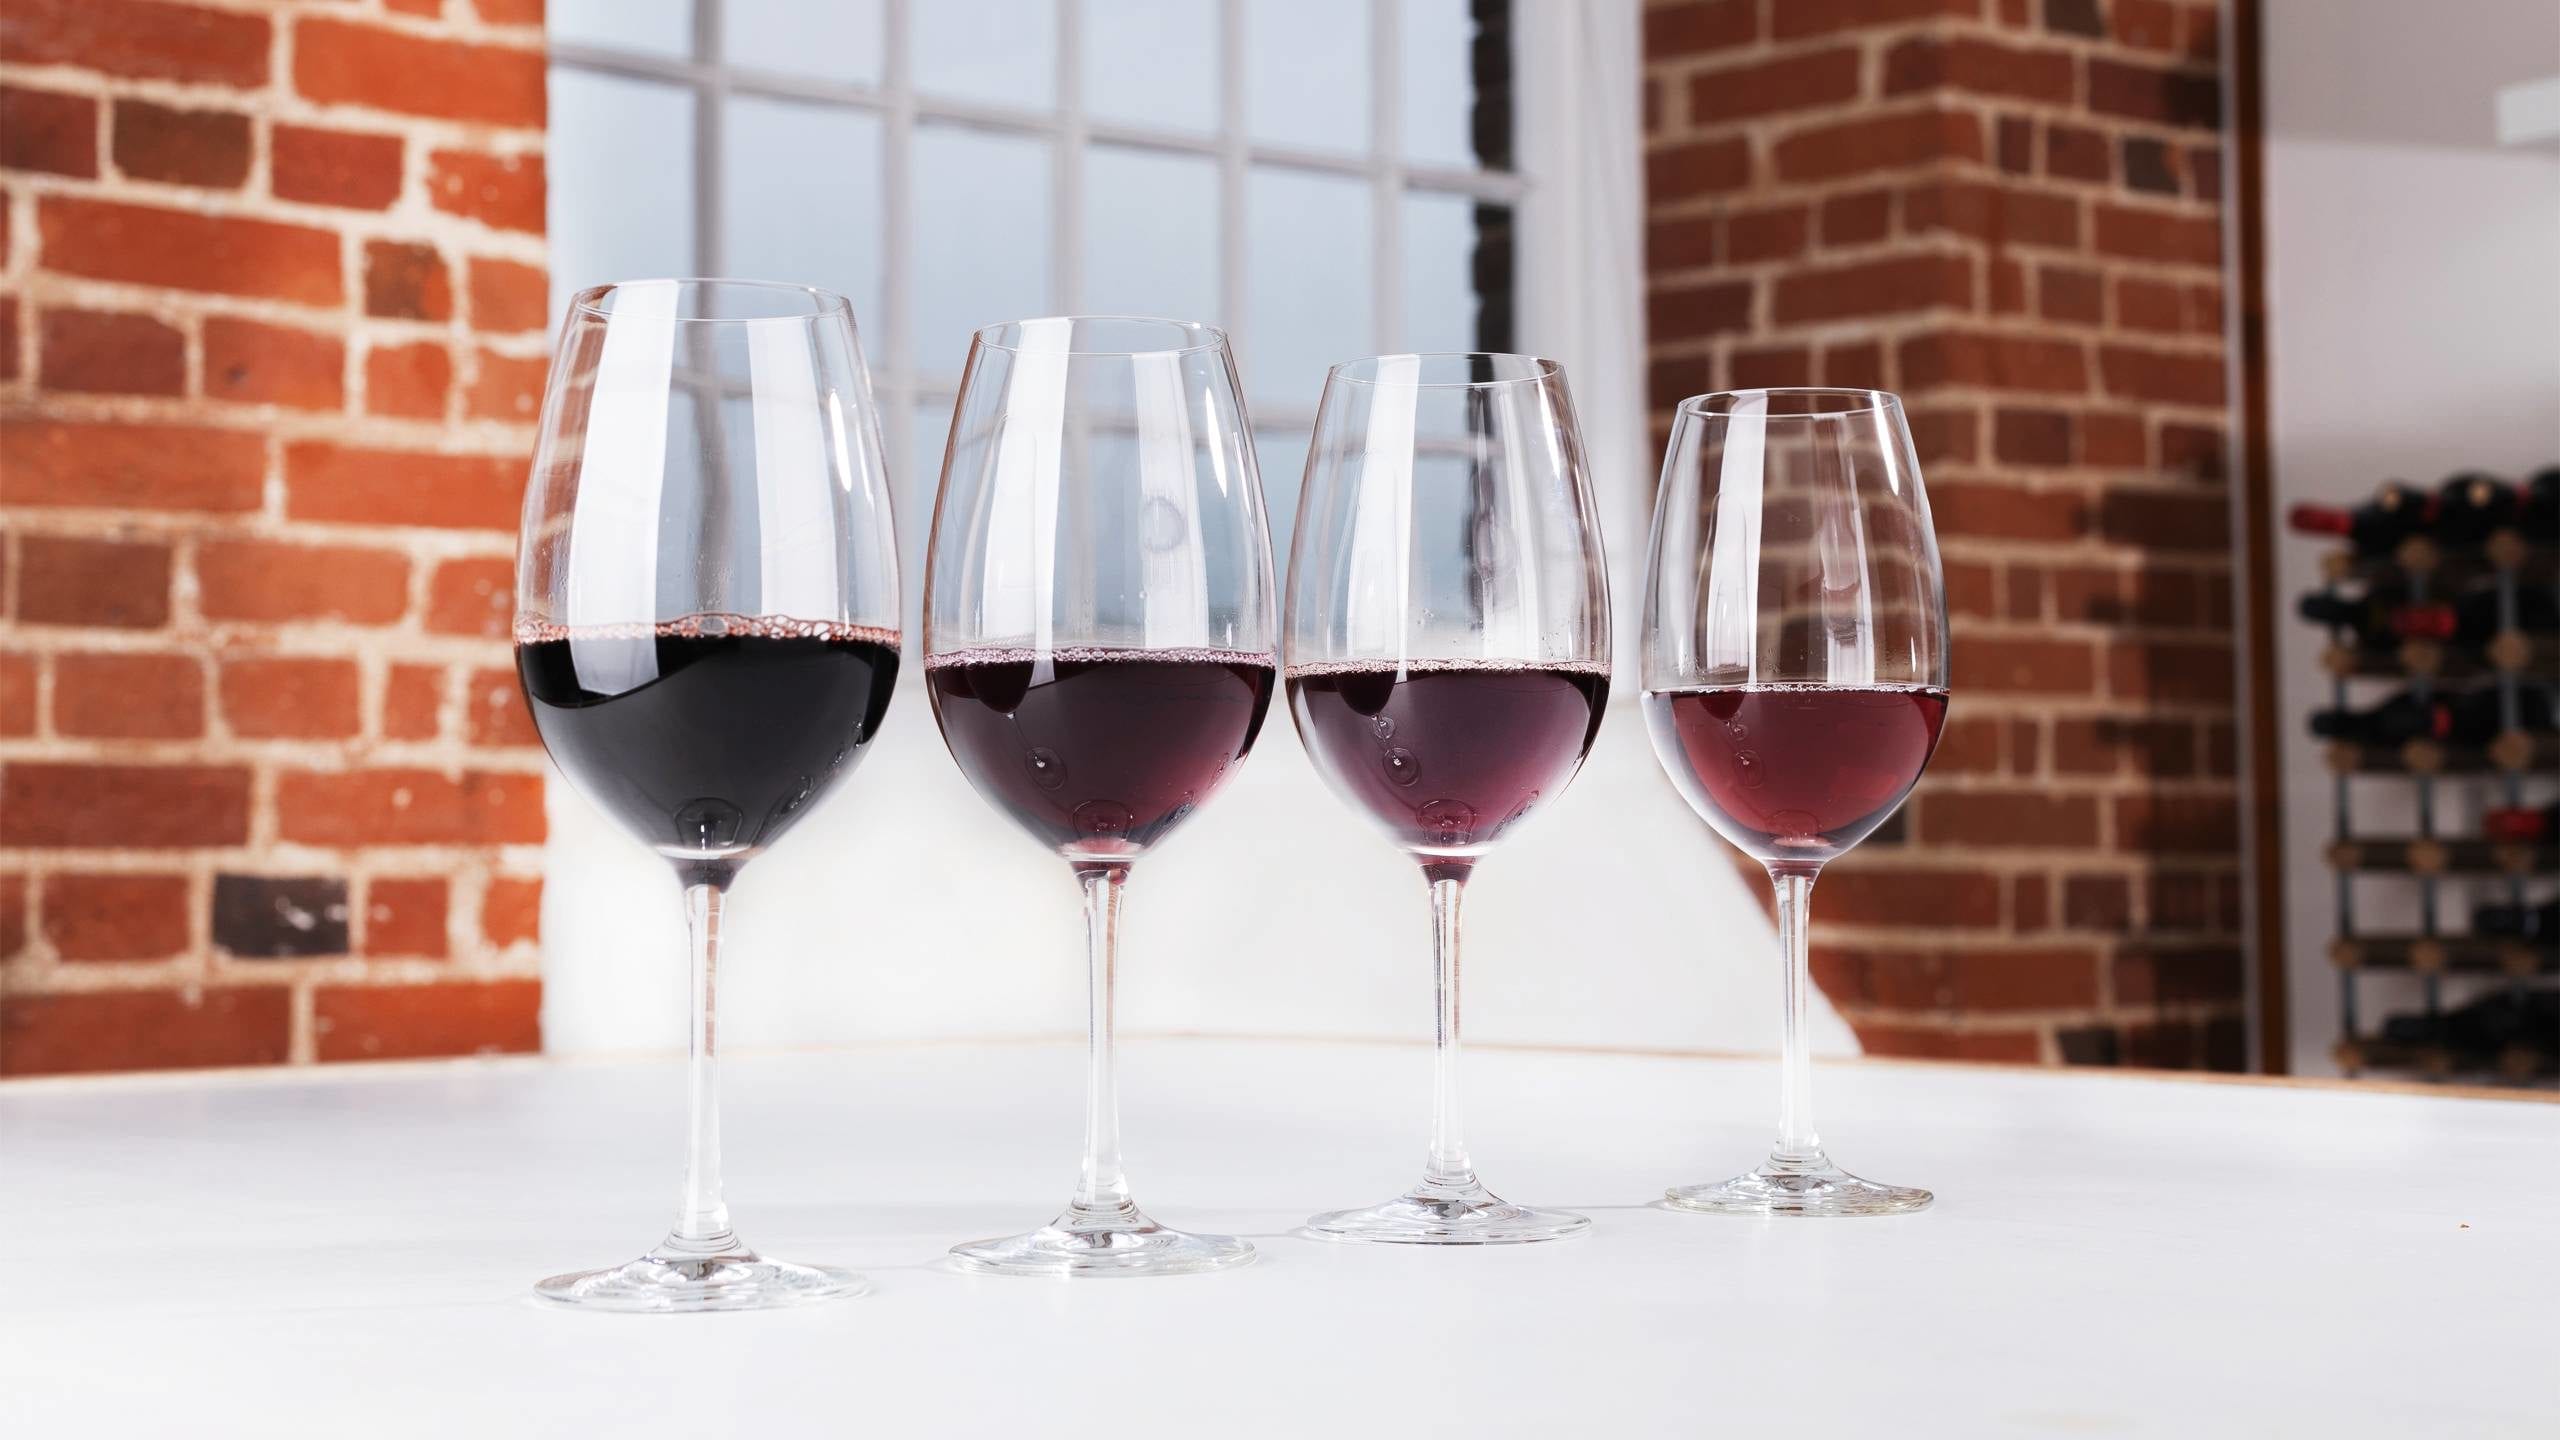 7 Types of Wine Glasses - Different Types of Wine Glasses